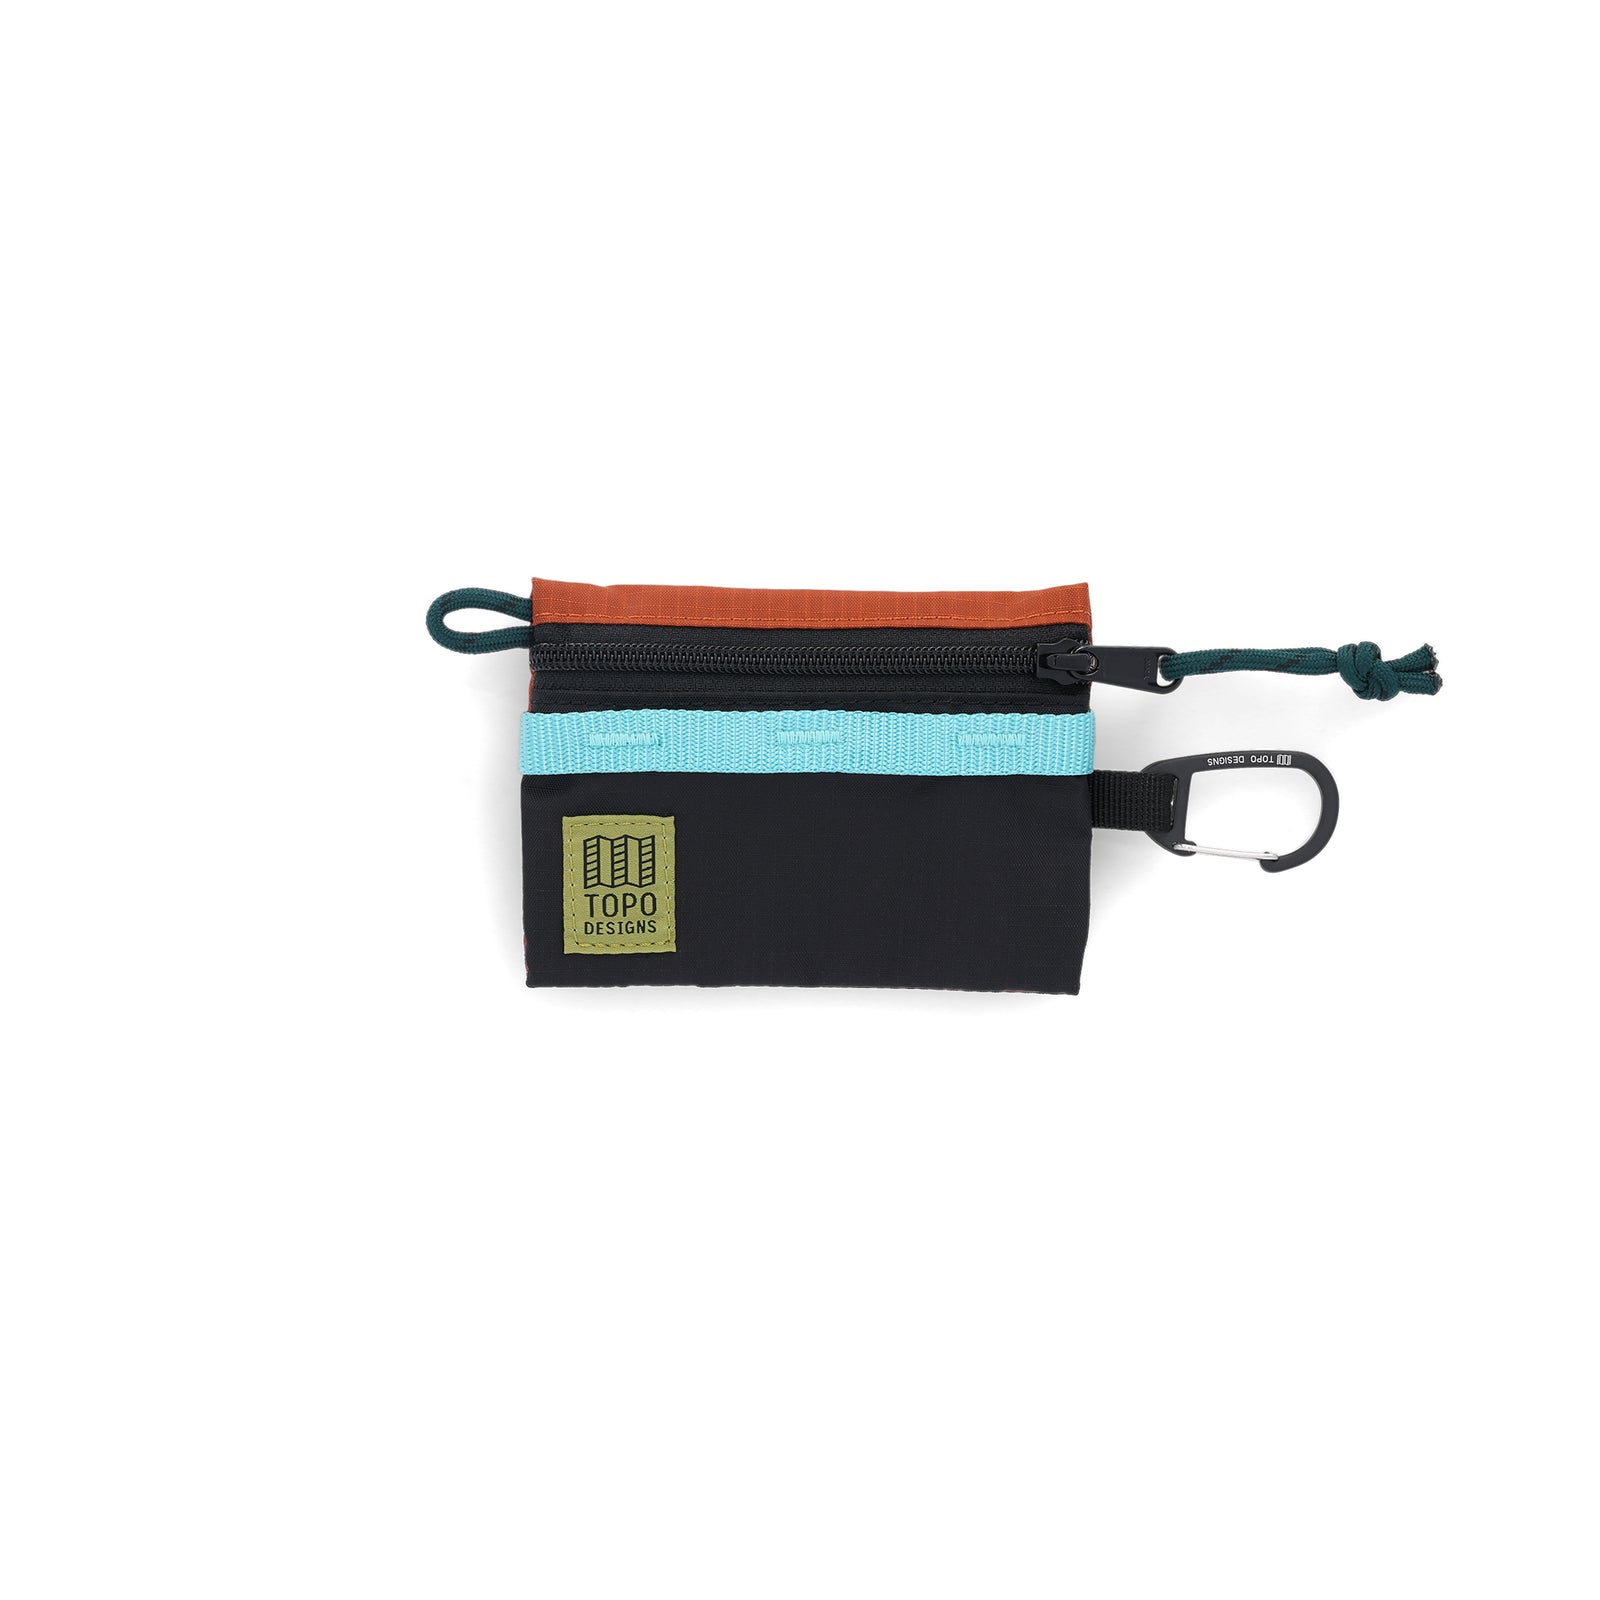 Topo Designs Mountain Accessory Bag carabiner clip pouch keychain wallet in "Clay / Black" lightweight recycled nylon.